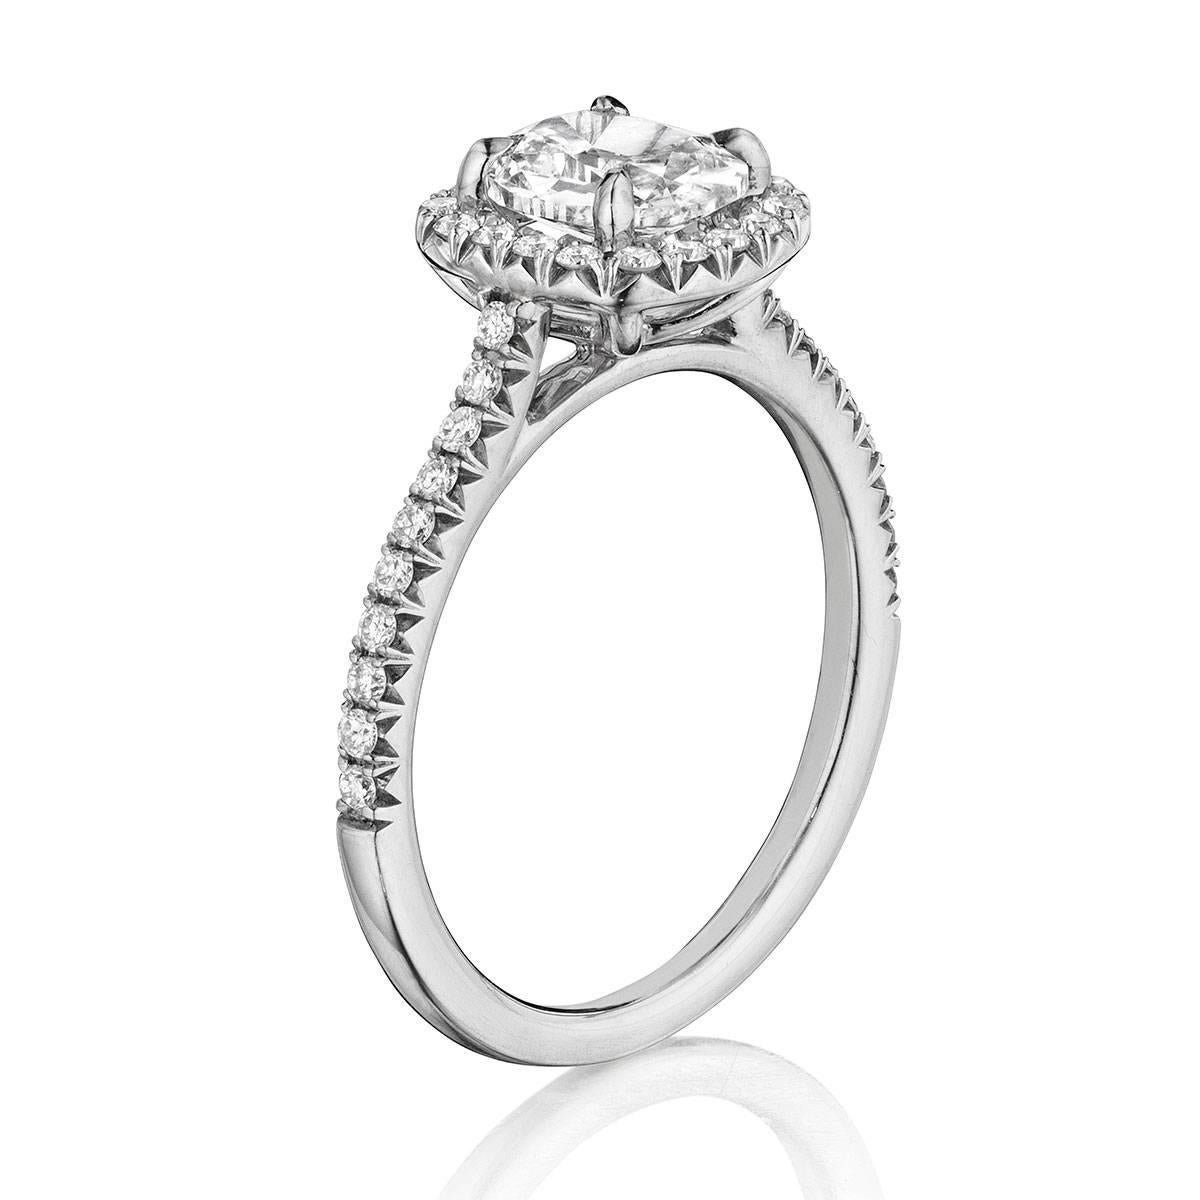 Vendor Model #: CLG117
Material: Platinum
Setting Style: Halo
Size: 6.5 (can be sized)
Center Diamond Details: 0.71ct cushion cut diamond. Center diamond is D in color and VVS1 in clarity.
Accent Diamond Details: 0.30ct accent round brilliant